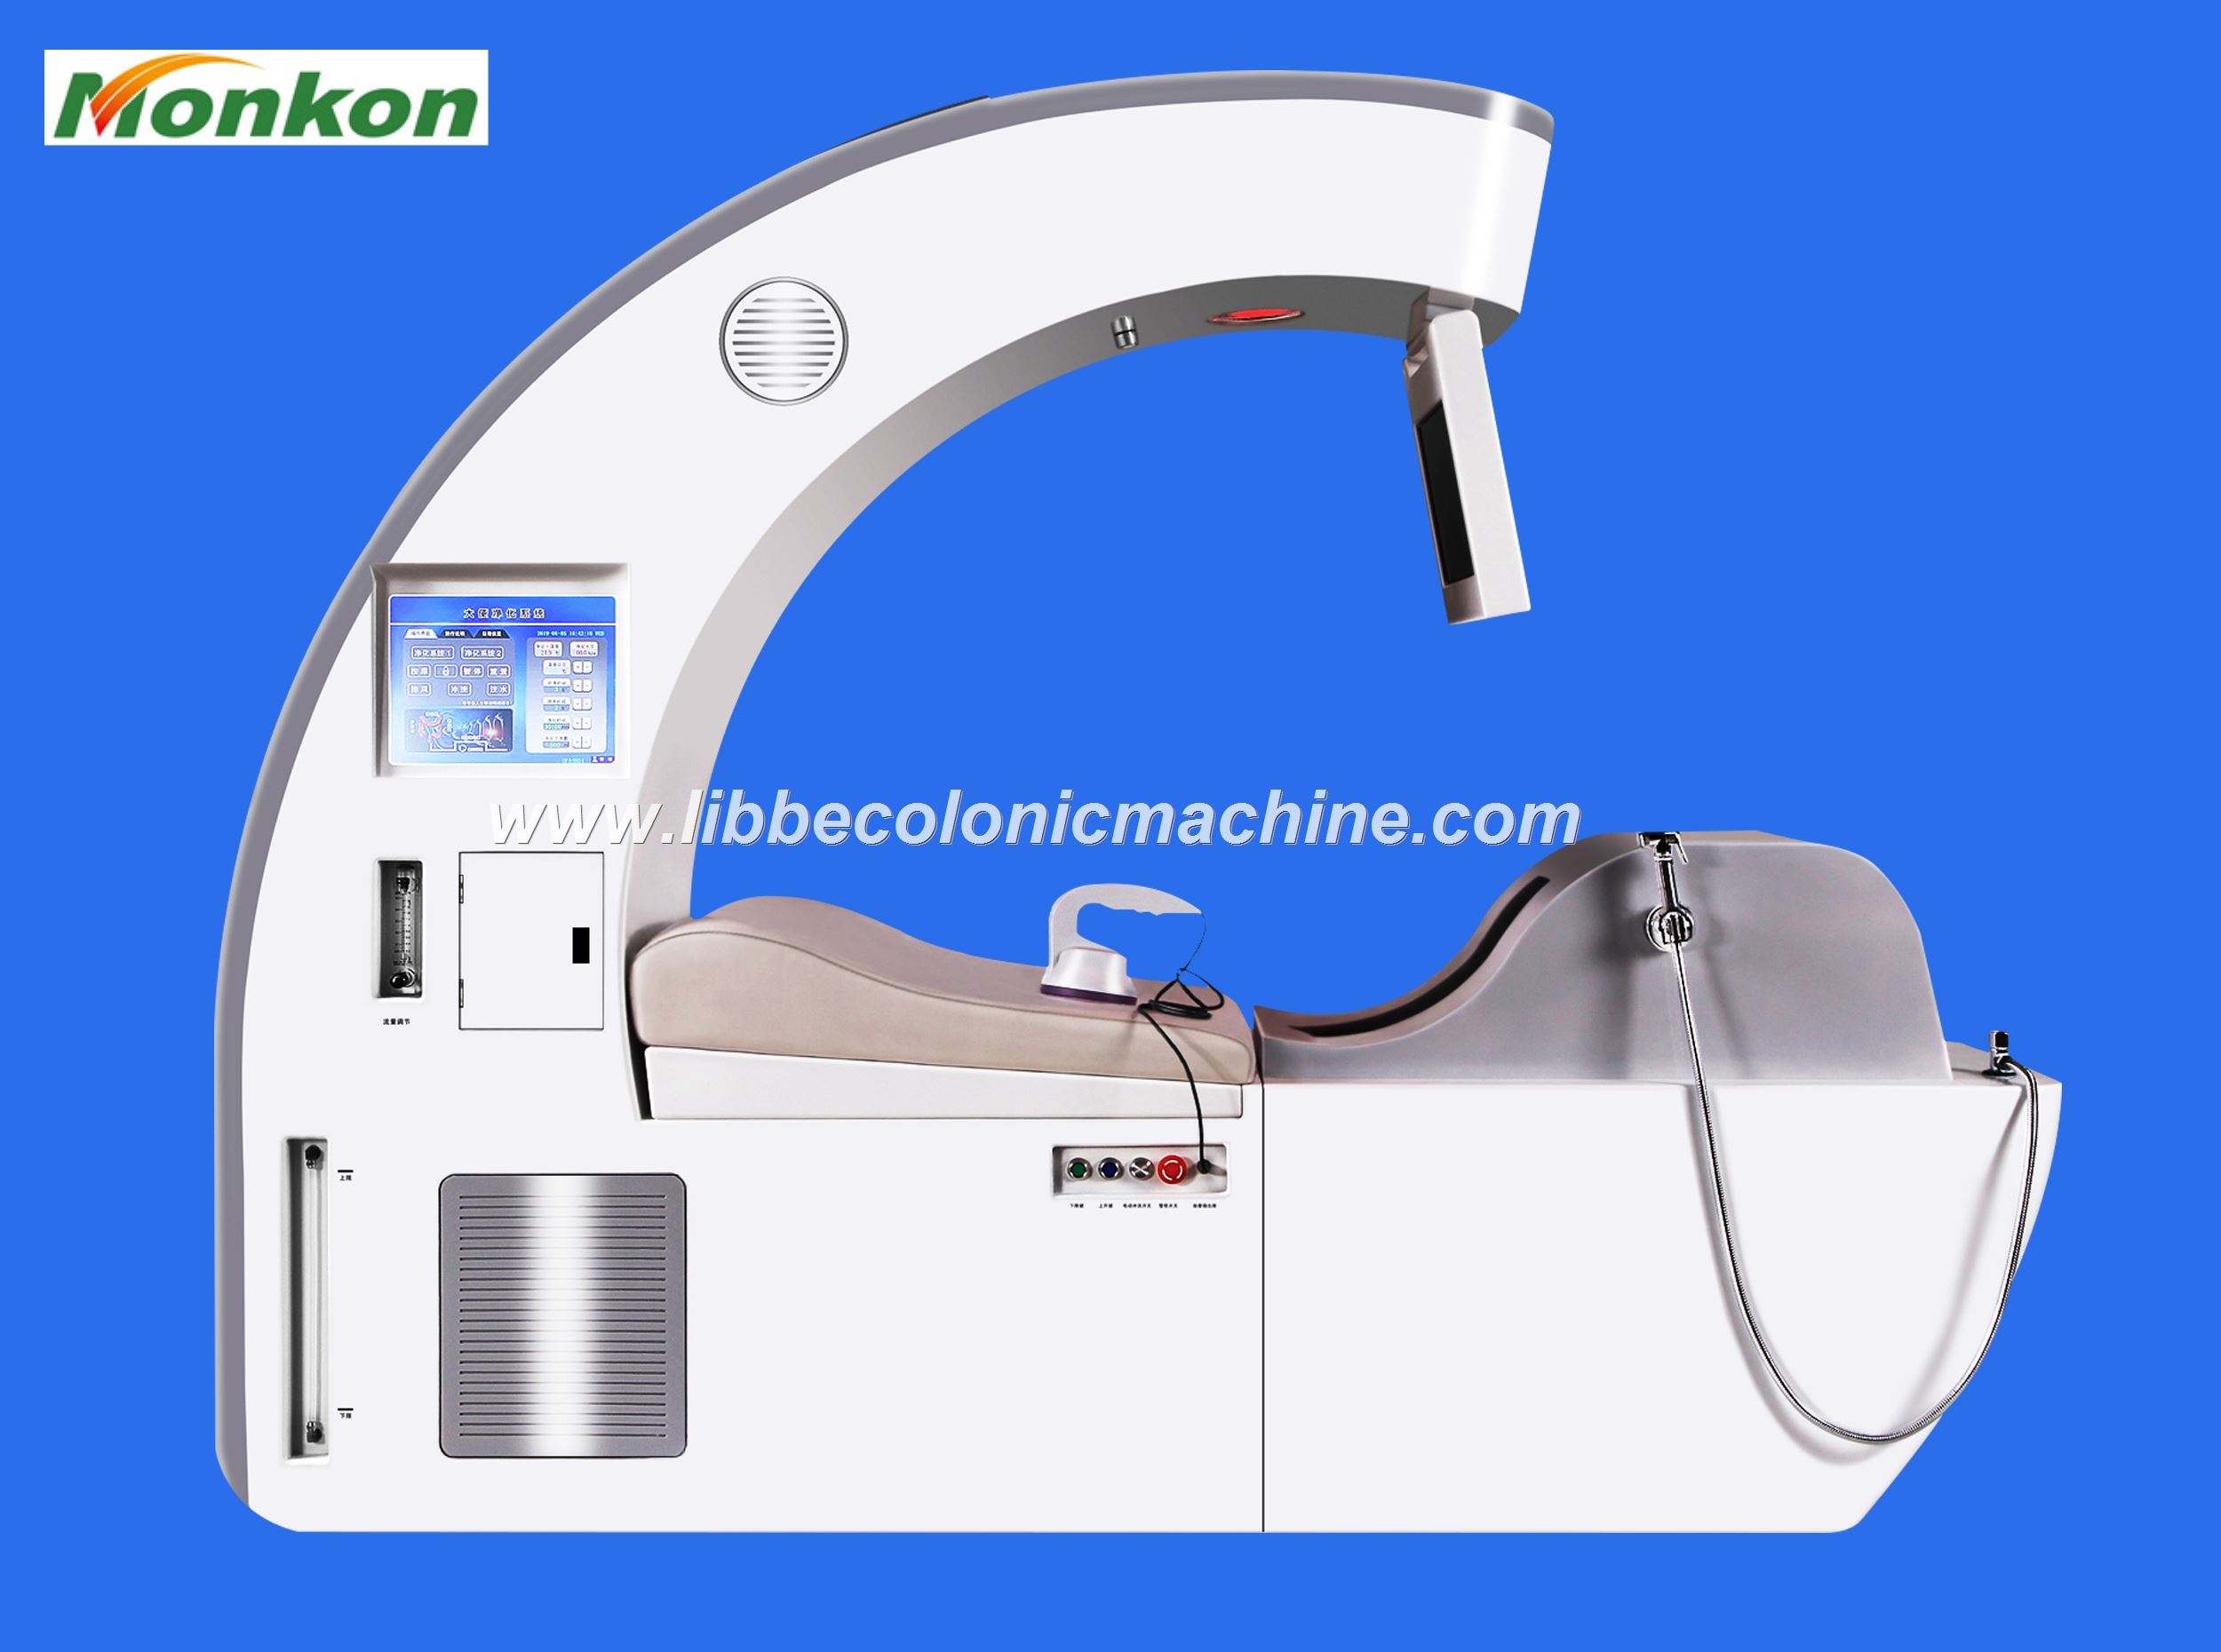 MAIKONG colon cleansing machine for sale